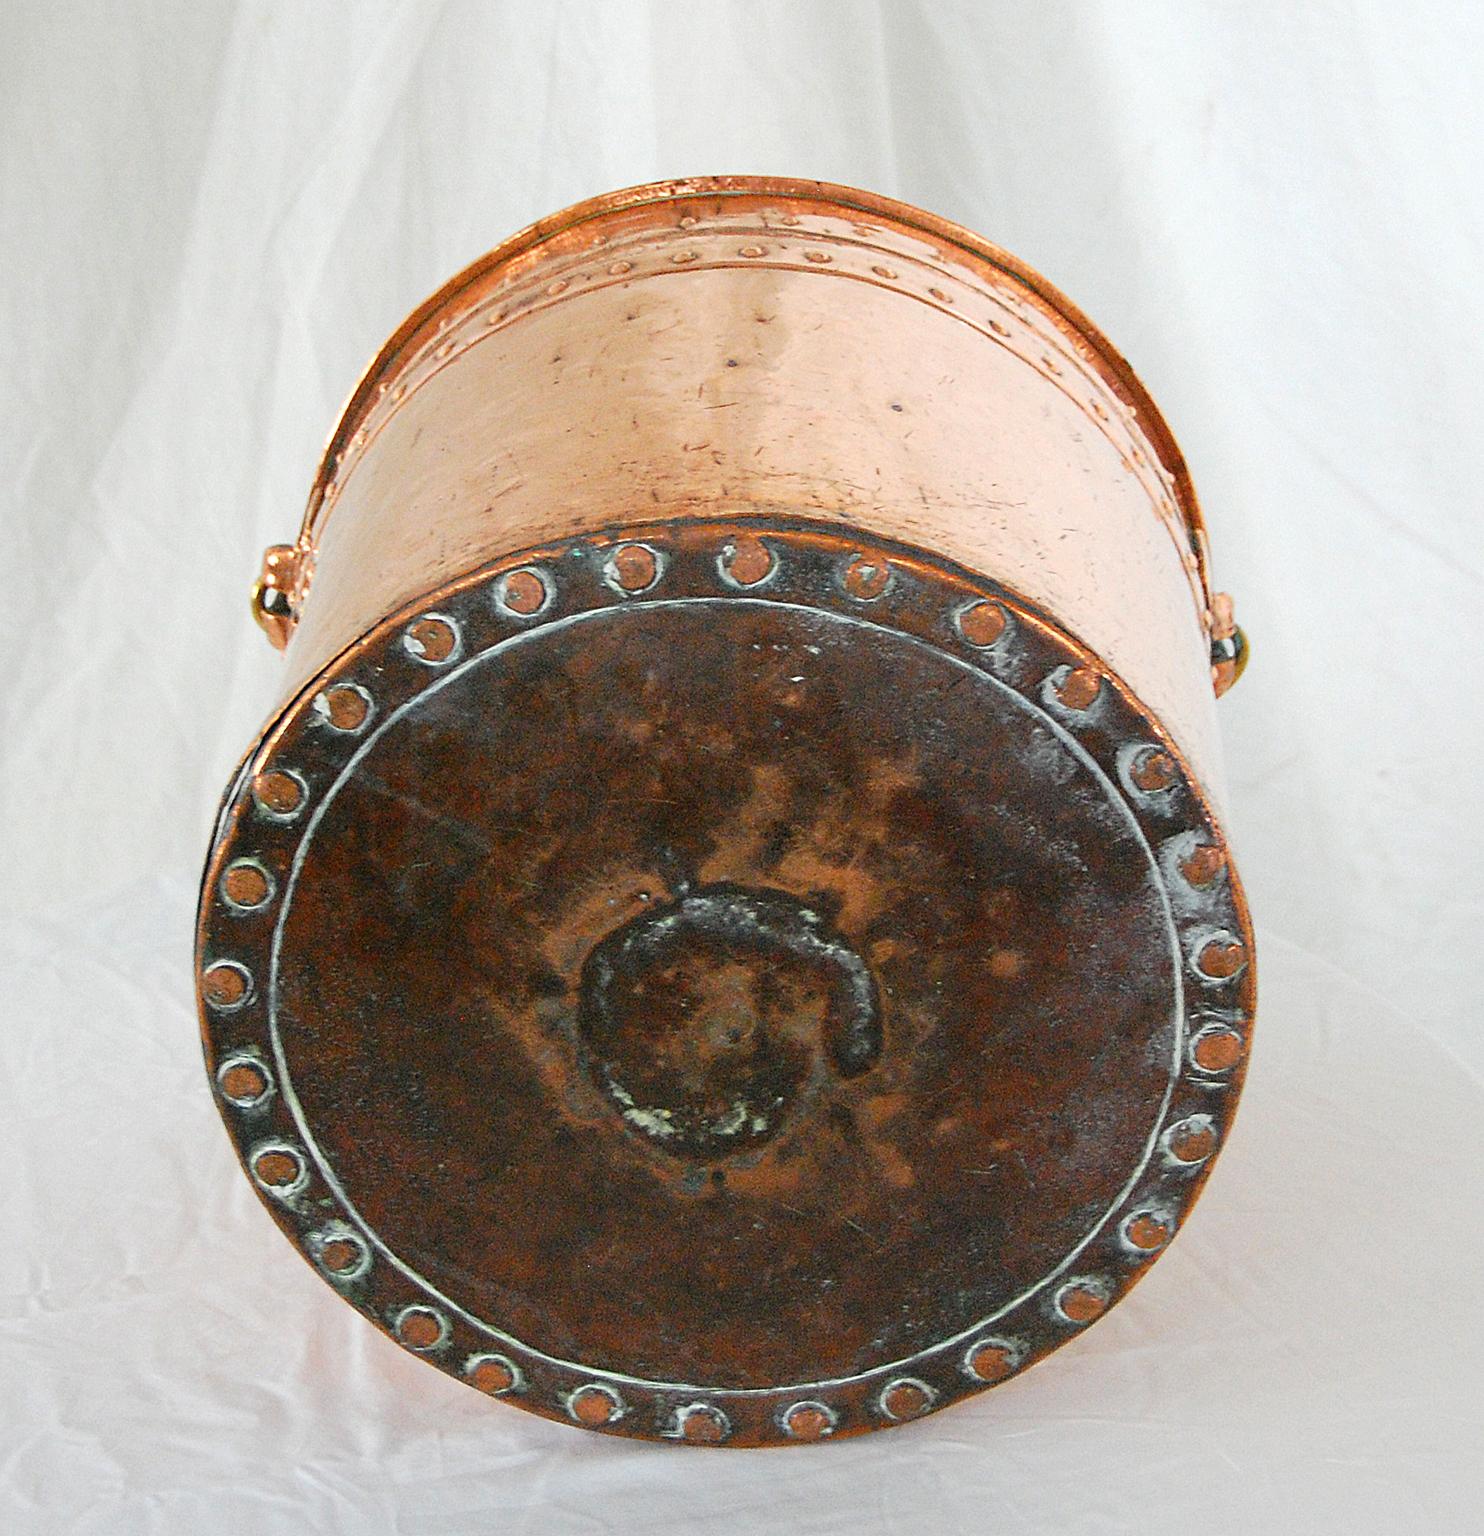 Victorian English 19th Century Copper Riveted Coal Bucket, Today for Logs or Plant